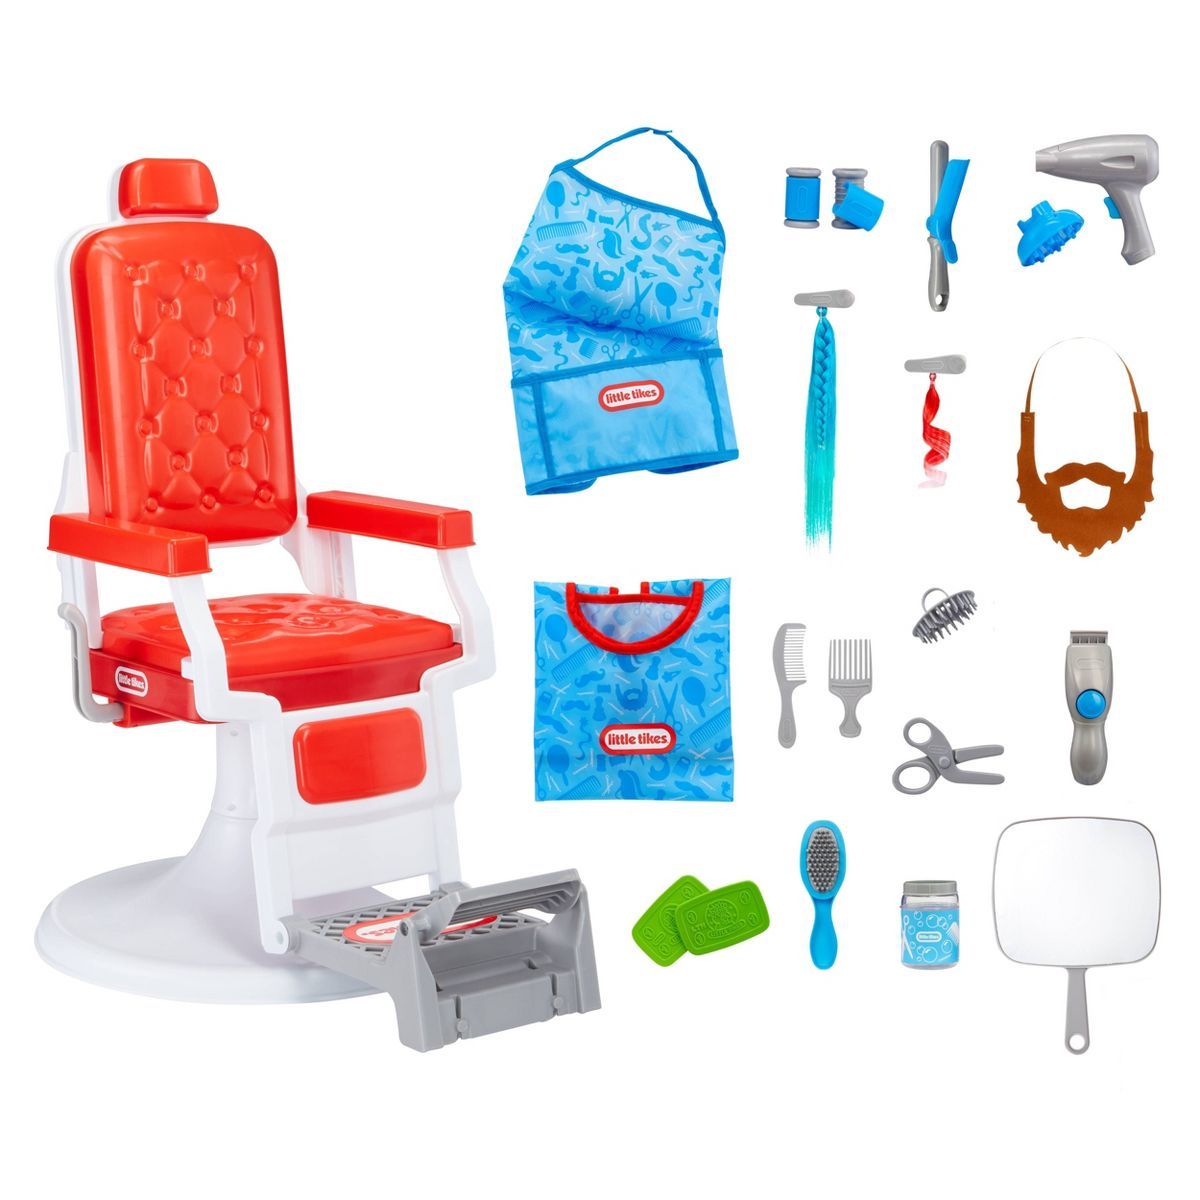 Little Tikes Hair Salon Beauty Set with 20 Accessories Pretend Play Barber Shop Stylist | Target